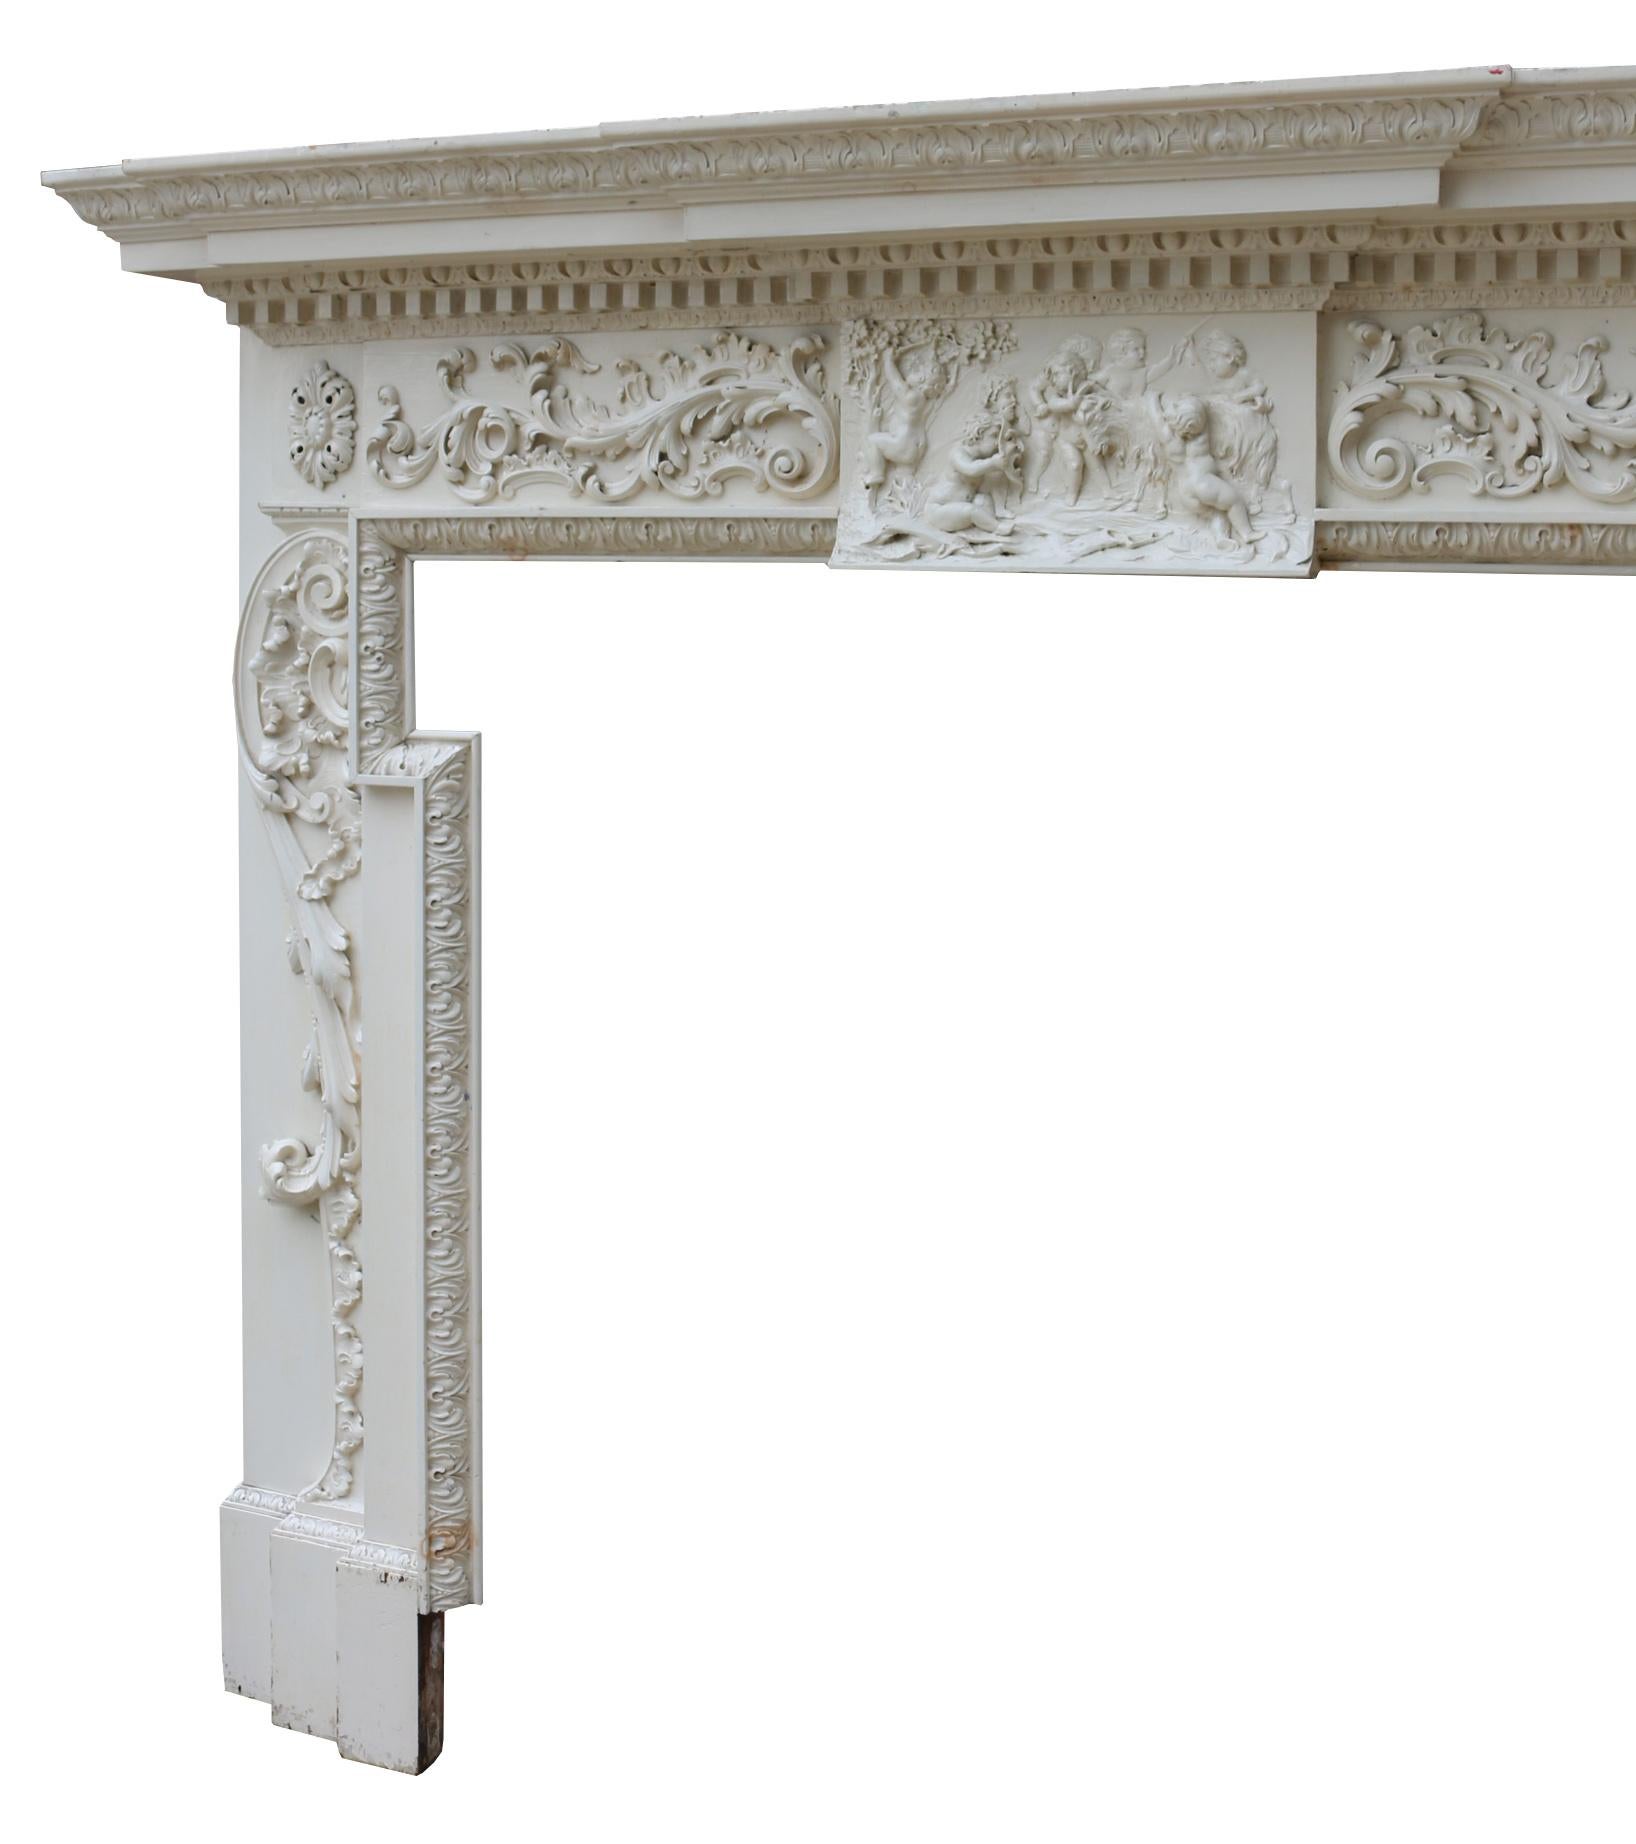 A richly decorated 18th century fire surround, originally from Hambledon House, North Yorkshire.

We believe the carving to be 18th century, with the structure altered and added to around 1900.

Opening height 129 cm

Opening width 139